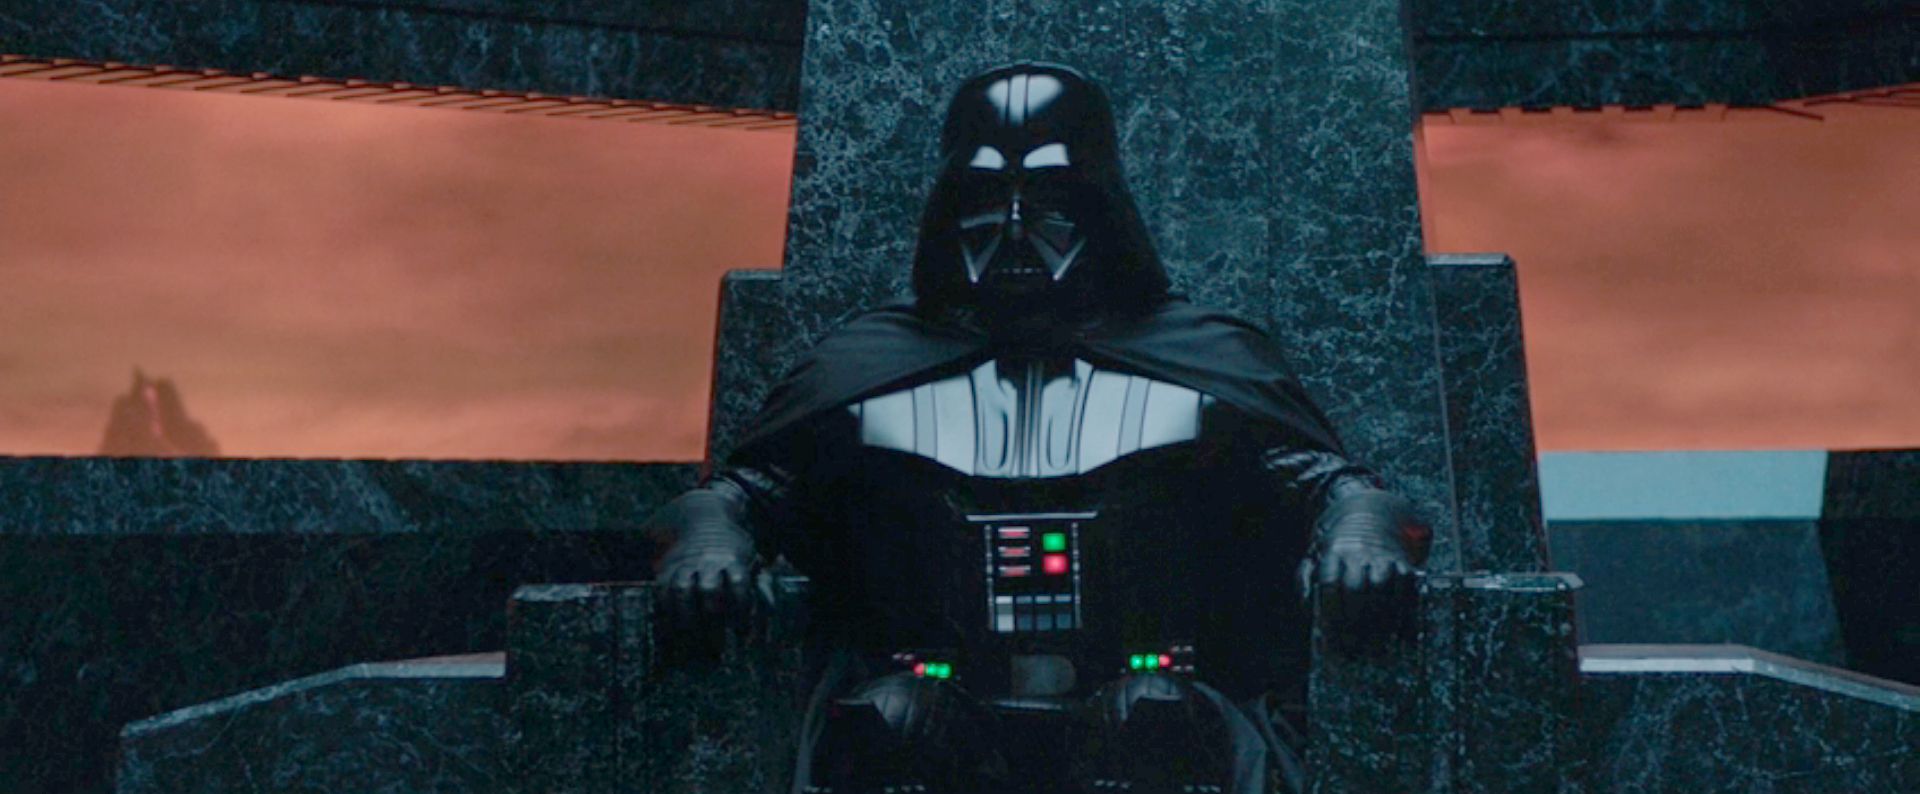 darth vader without armor